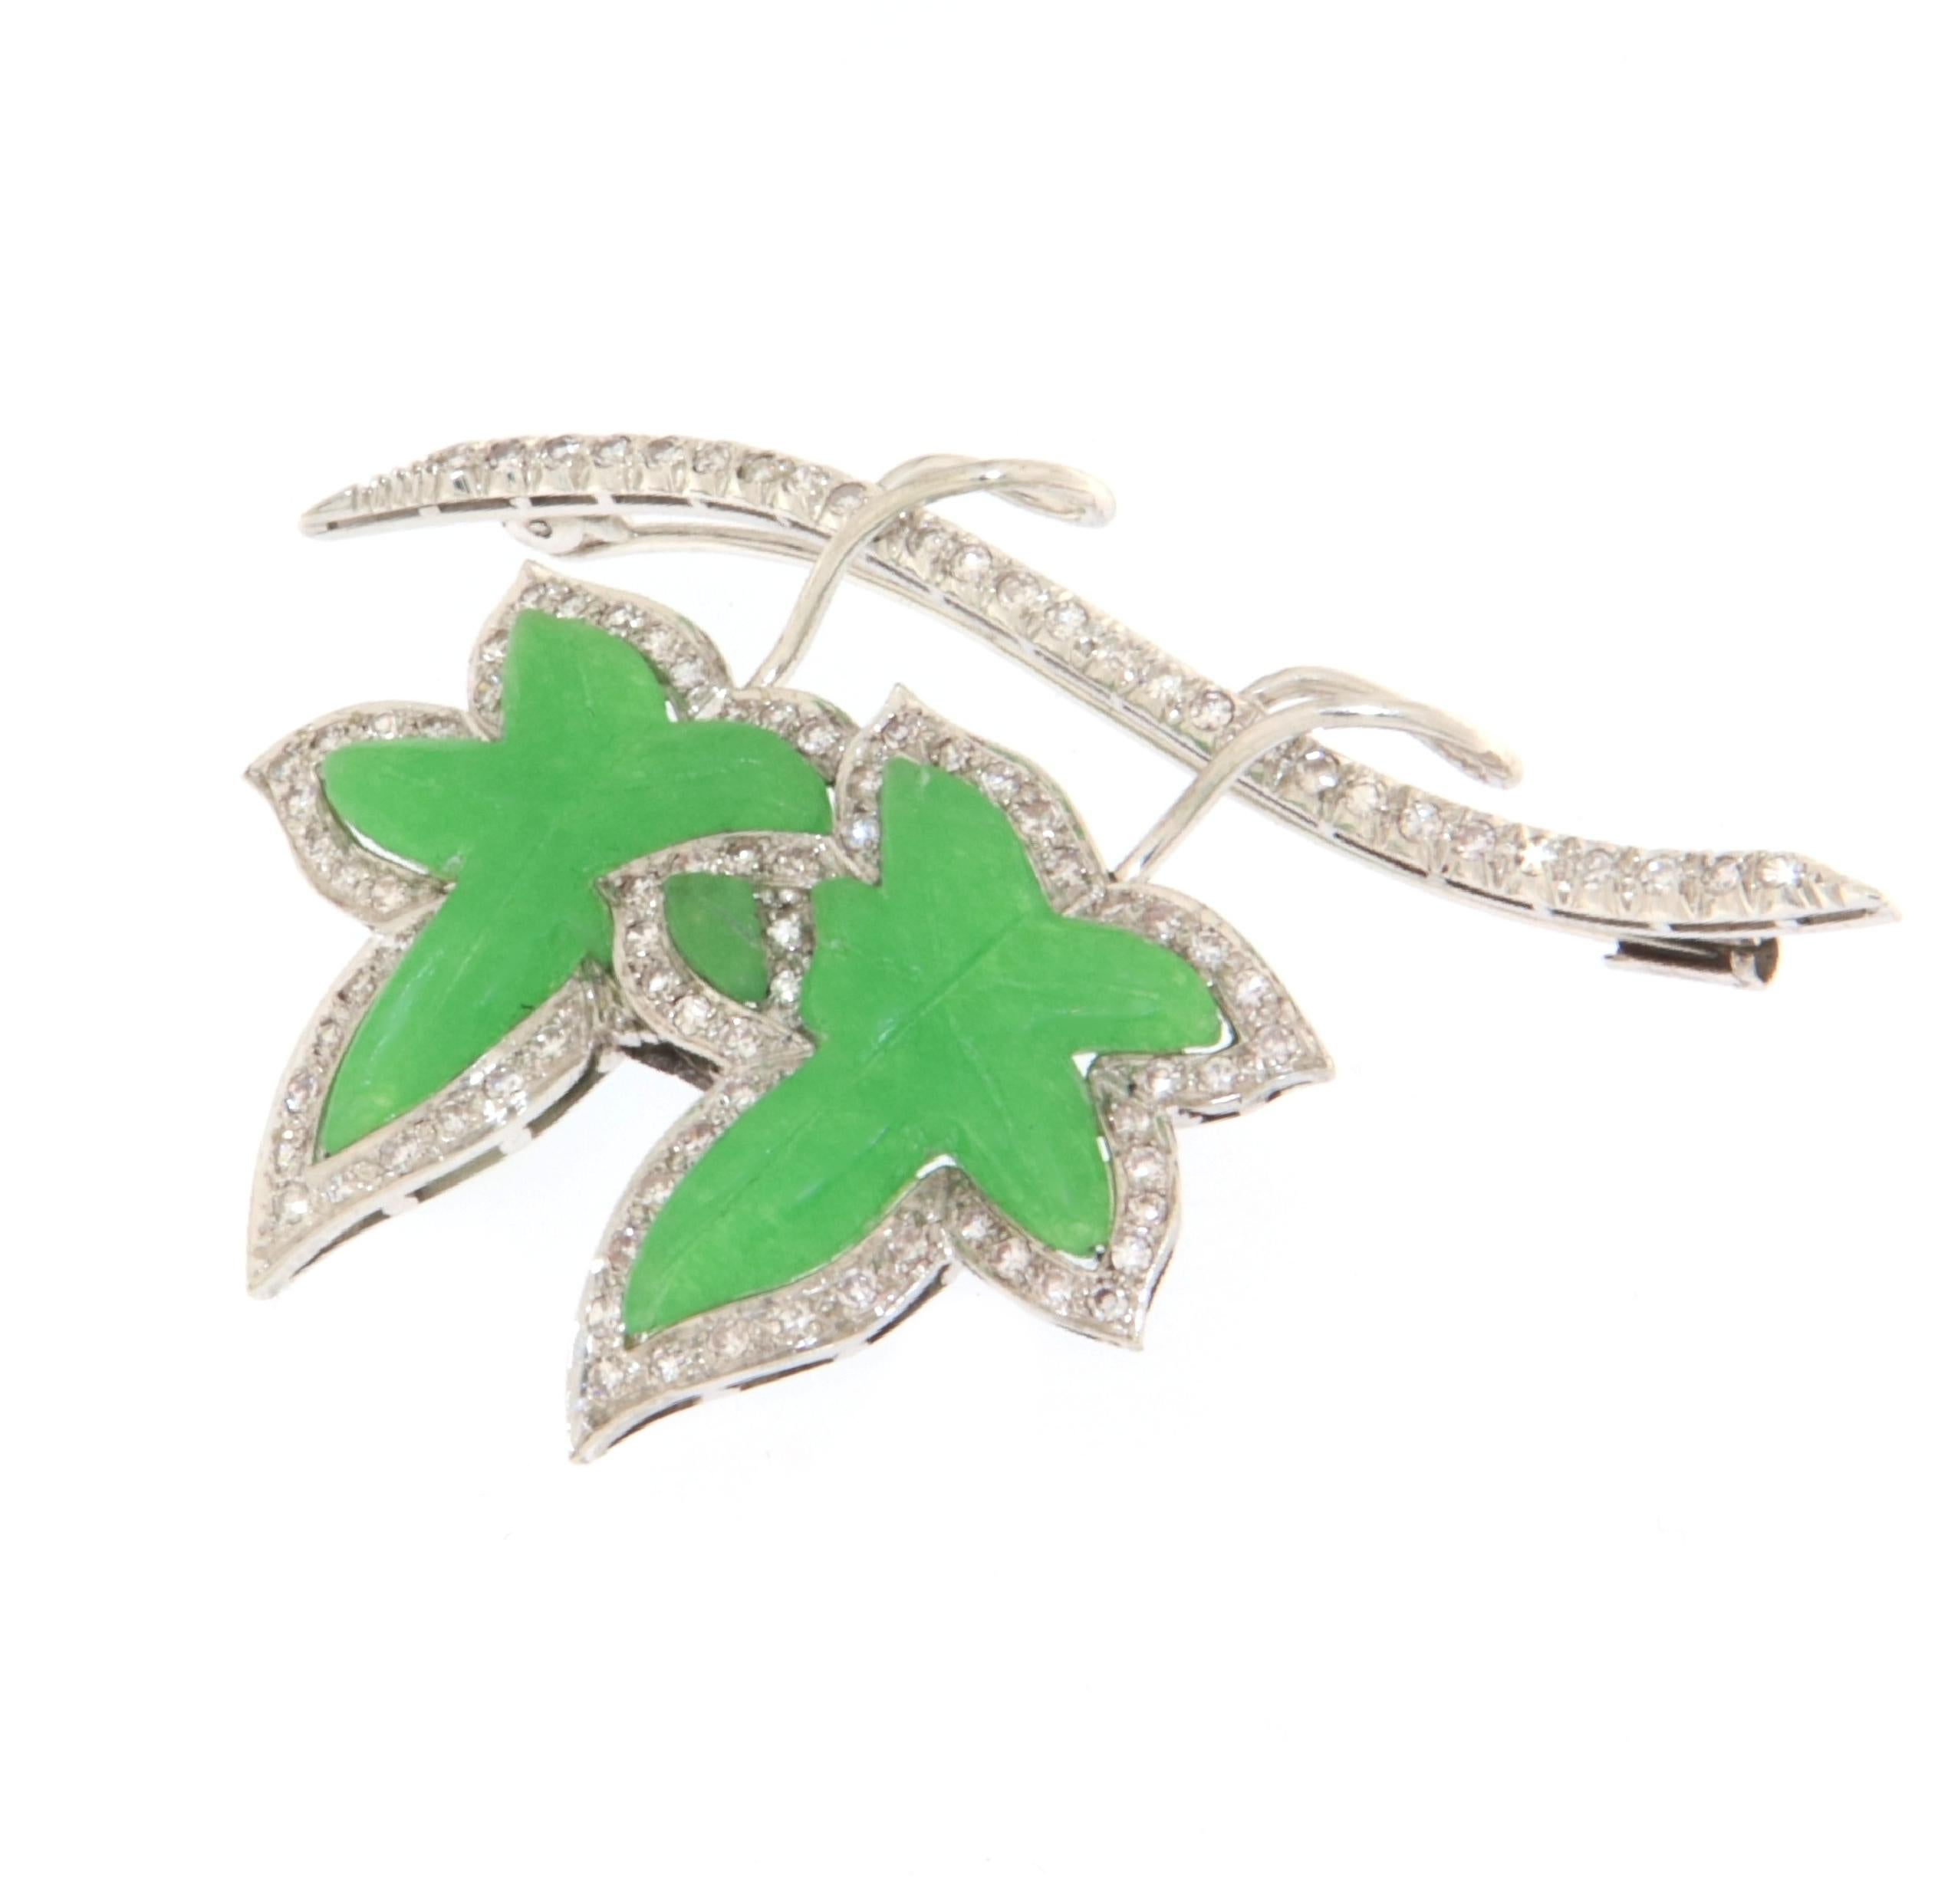 This brooch, depicting two leaves held by a branch, entirely crafted in 18-karat white gold, is a work of exquisite beauty and sophistication. Inspired by nature, the design captures the elegance and grace of leaves through the use of jade, a